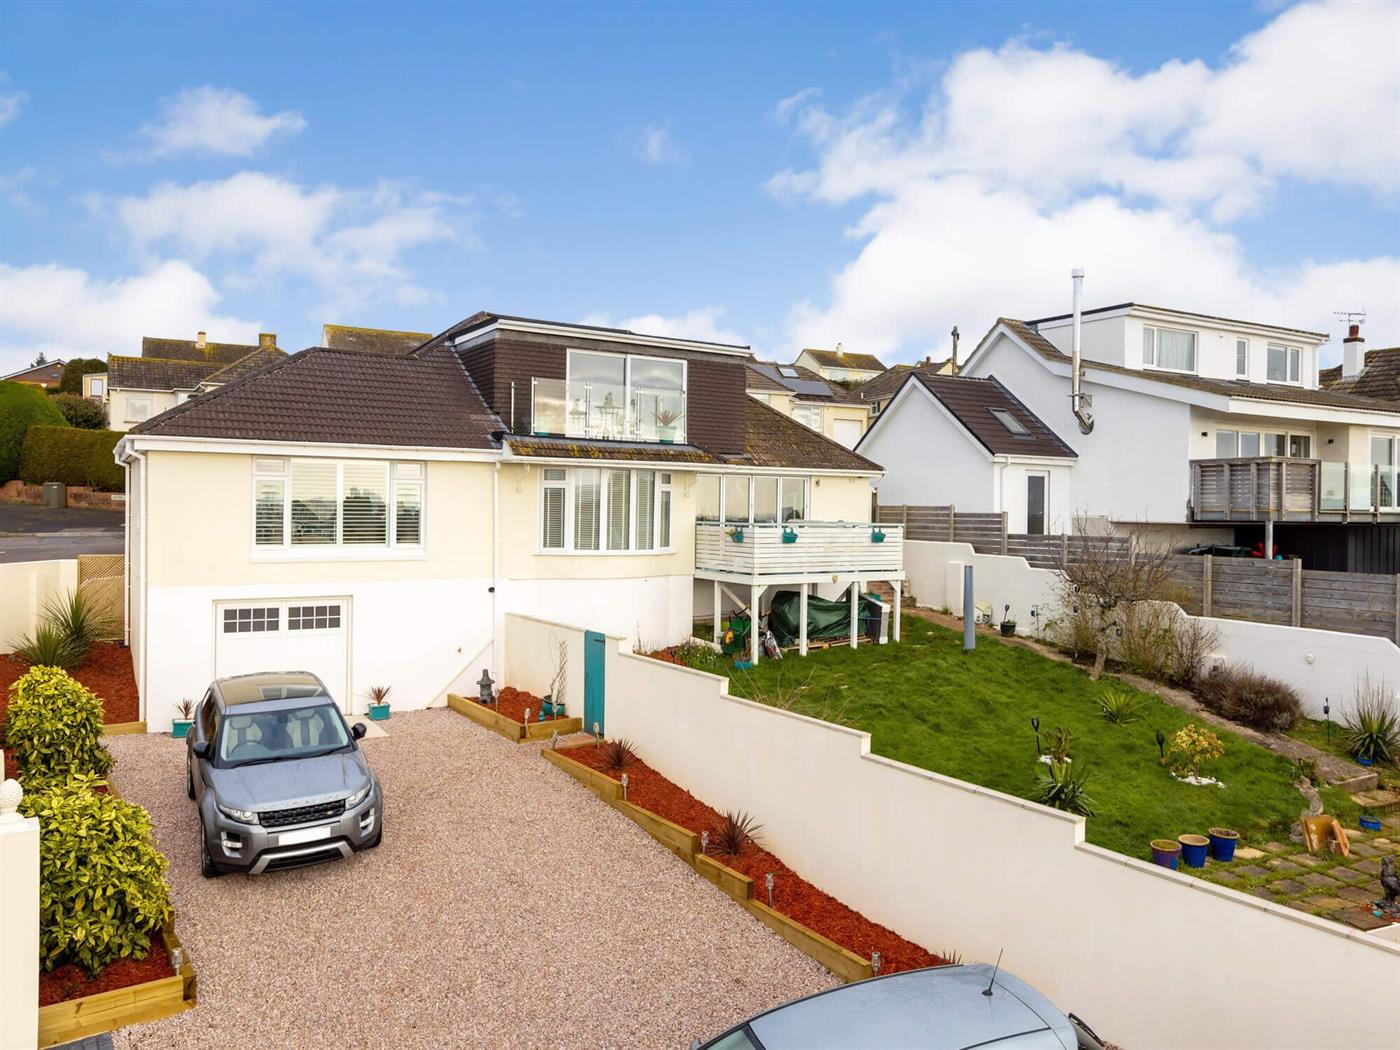 4 Bedroom Detached Bungalow for Sale (Sold): Windmill Gardens, Paignton, TQ3 1BL